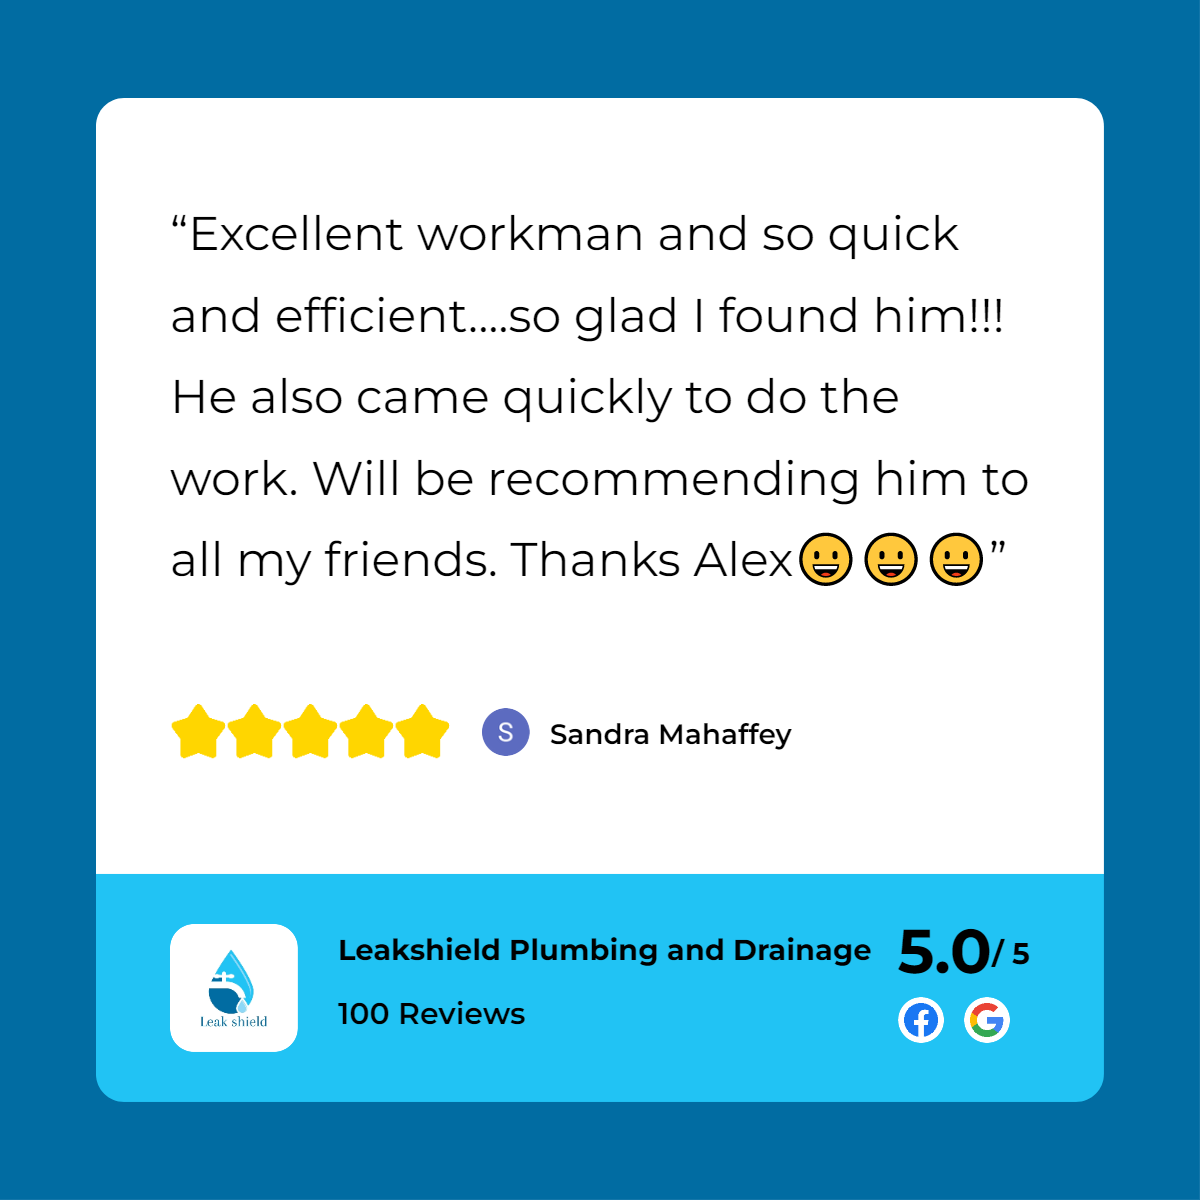 A customer review for a plumber in leeds, england.